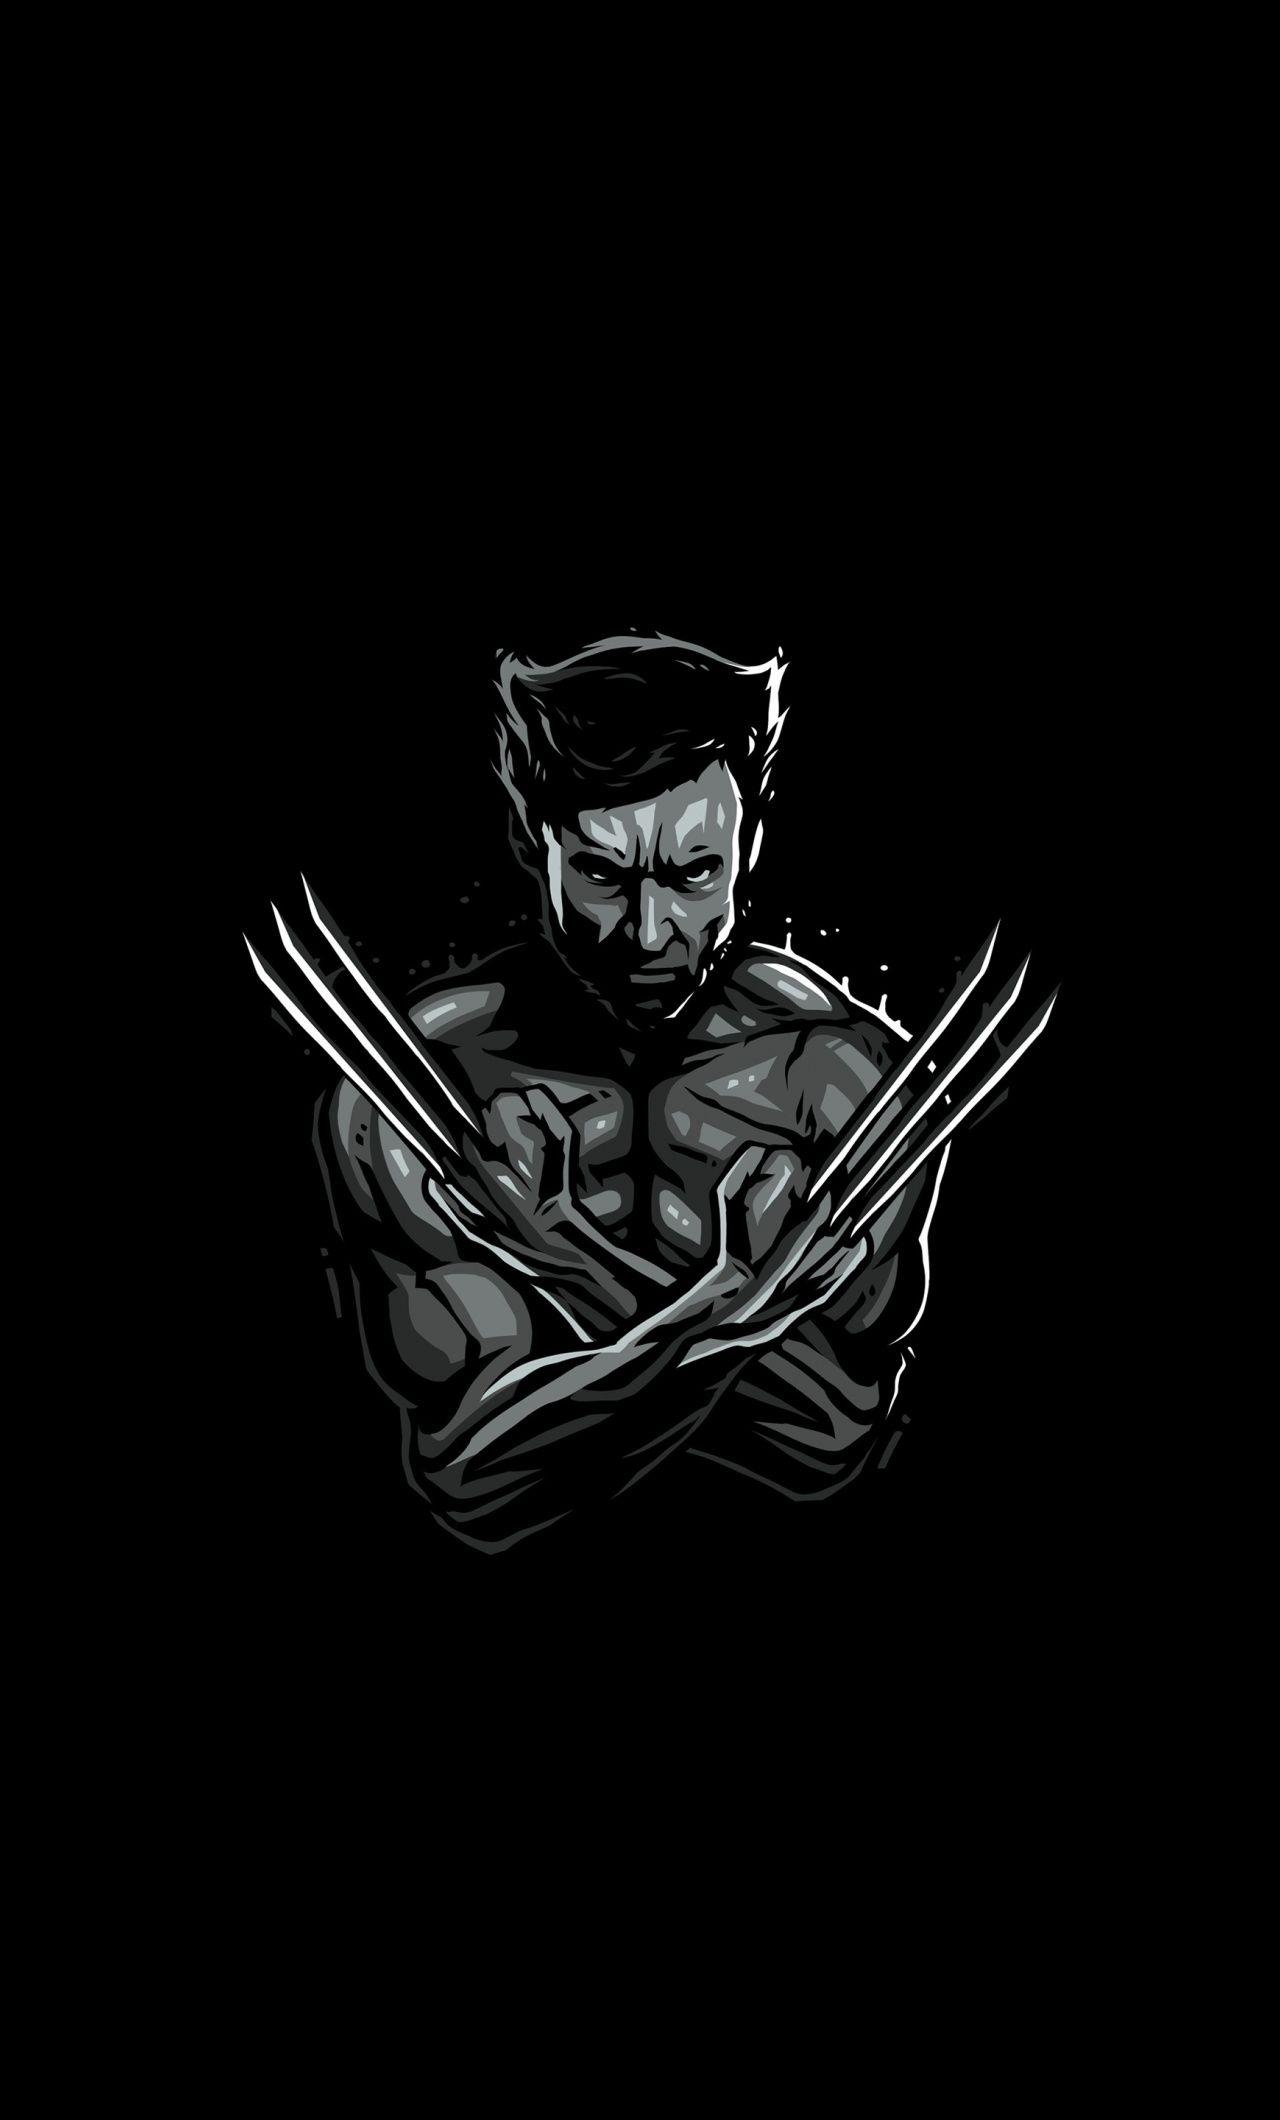 4k Iphone Wolverine Wallpapers Wallpaper Cave